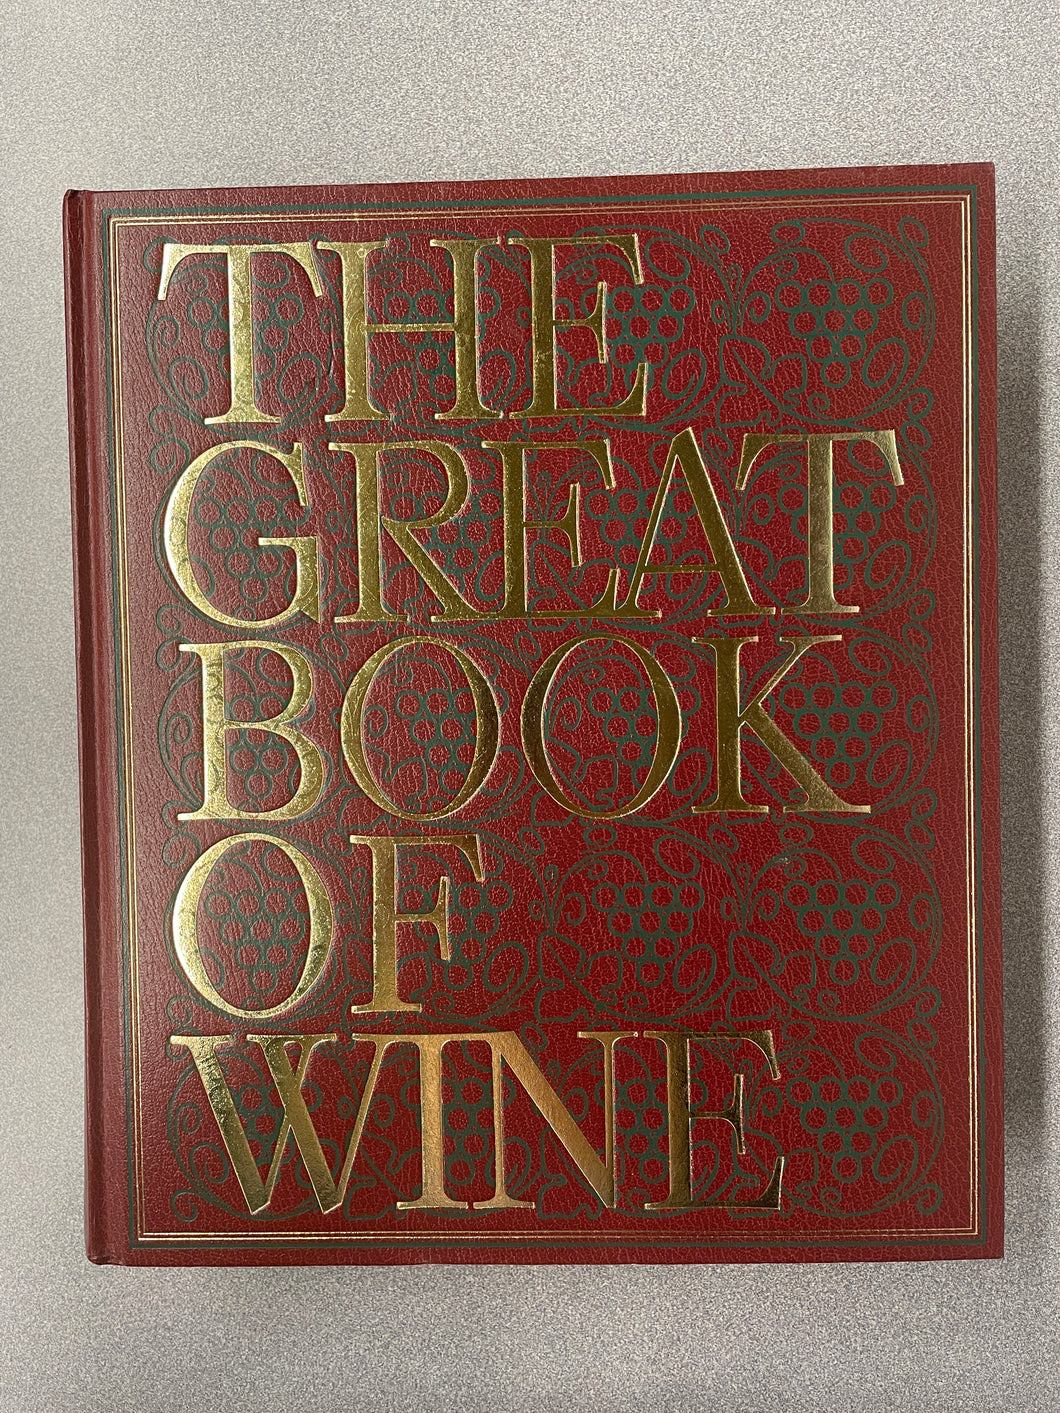 The Great Book of Wine; Revised and Enlarged Edition Including Over 240 New Illustrations, Chartwell Books, Inc. [1982] CO 4/23.